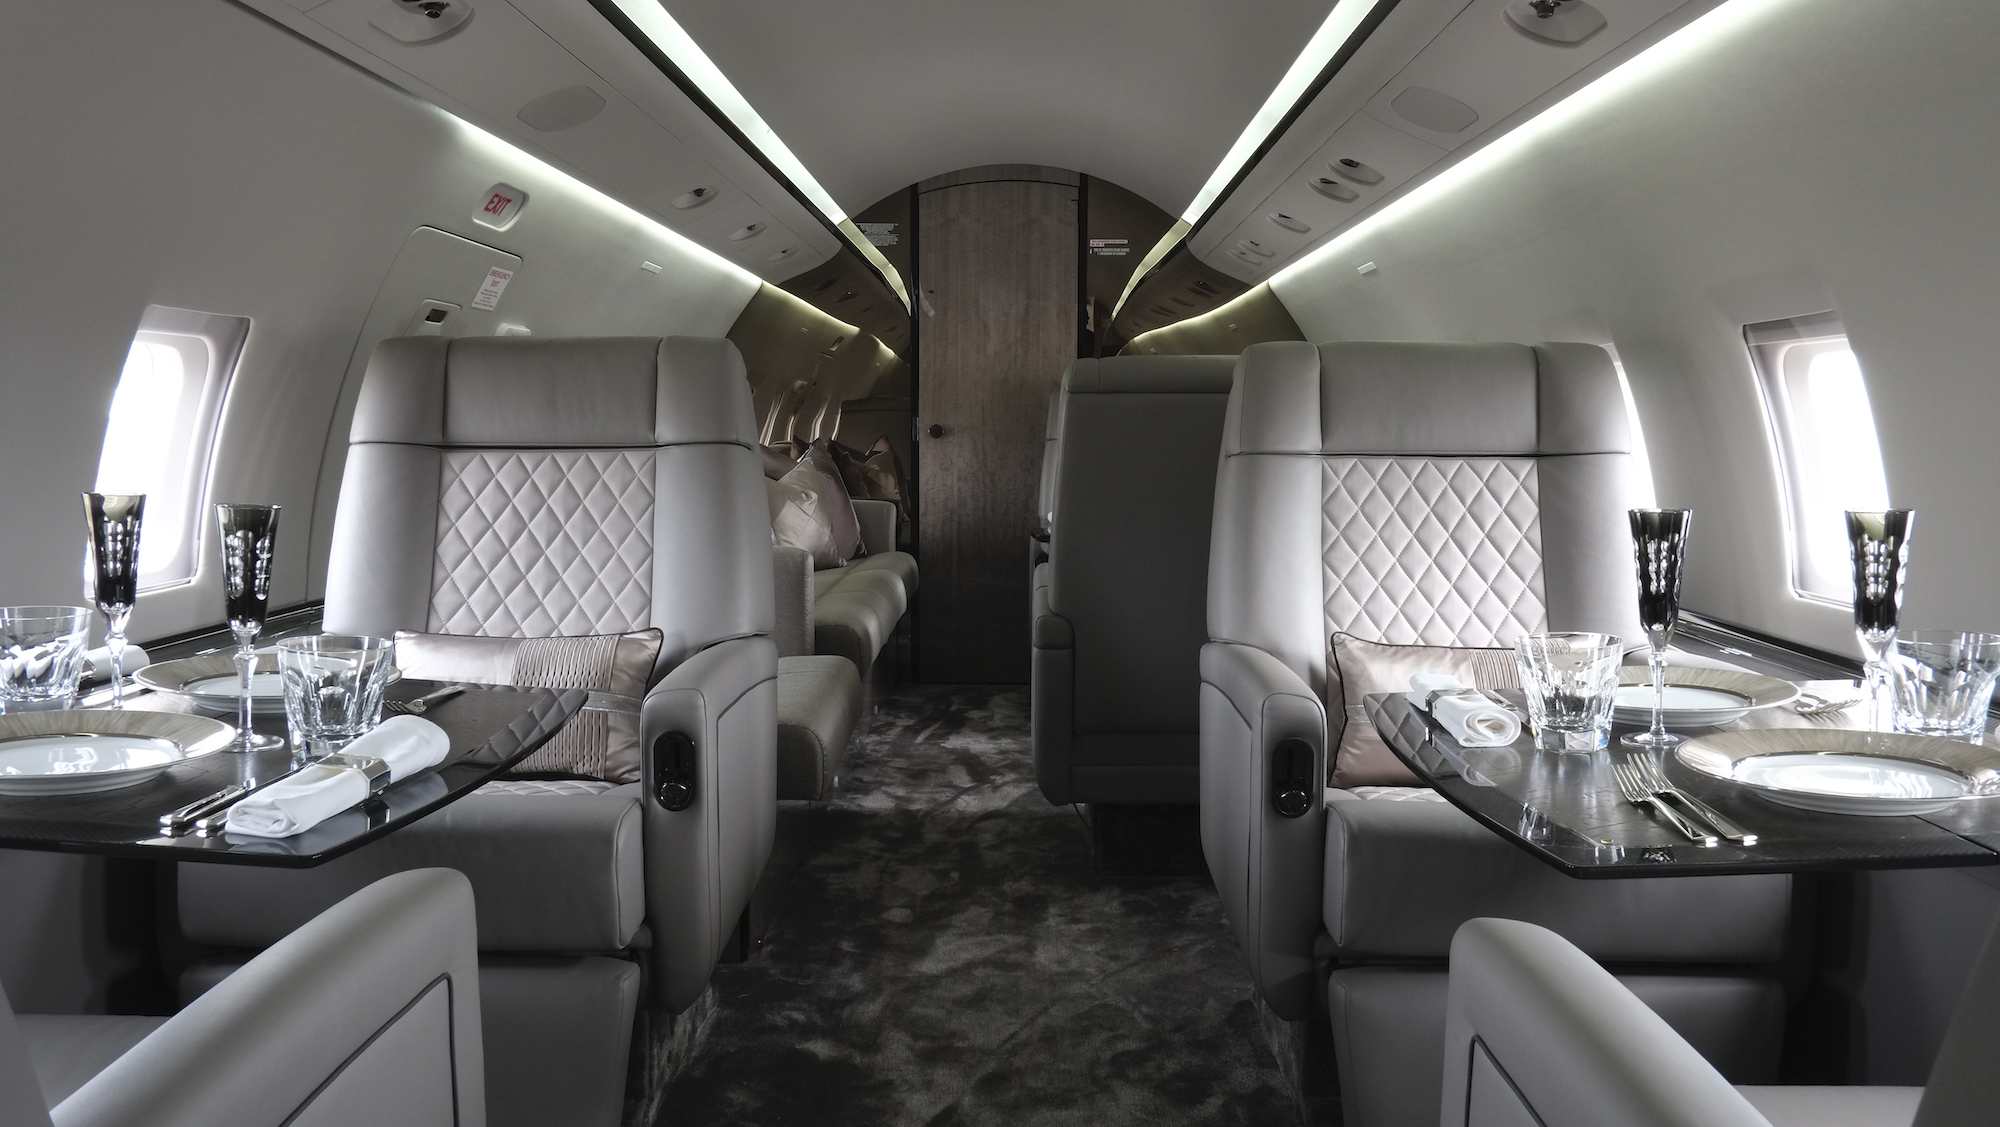 Martin Kemp Design are known for creating timeless and refined private jet interiors, as with their Challenger 606 private plane